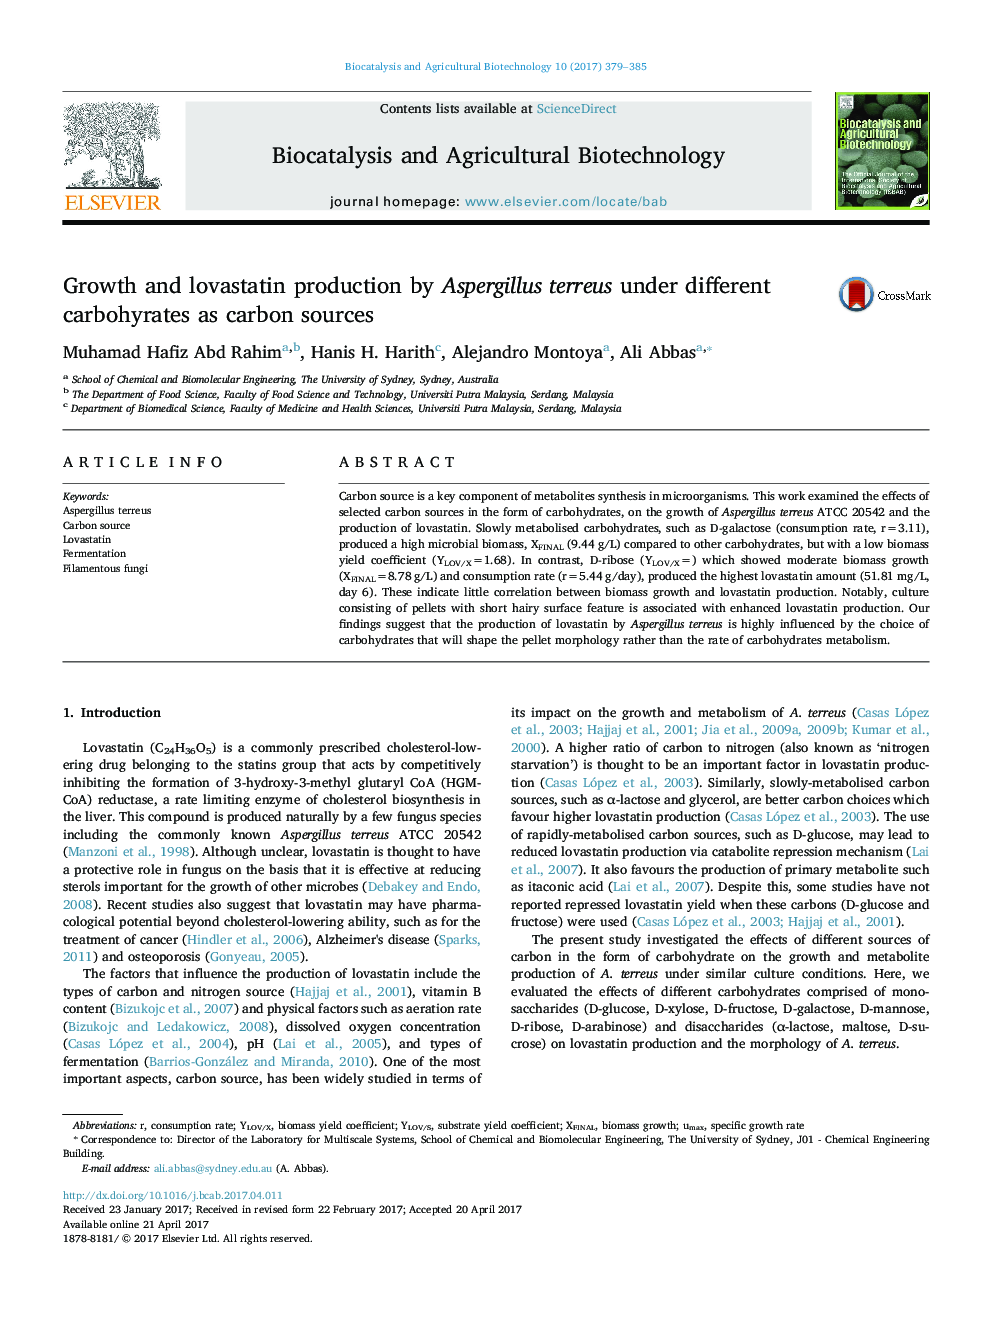 Growth and lovastatin production by Aspergillus terreus under different carbohyrates as carbon sources